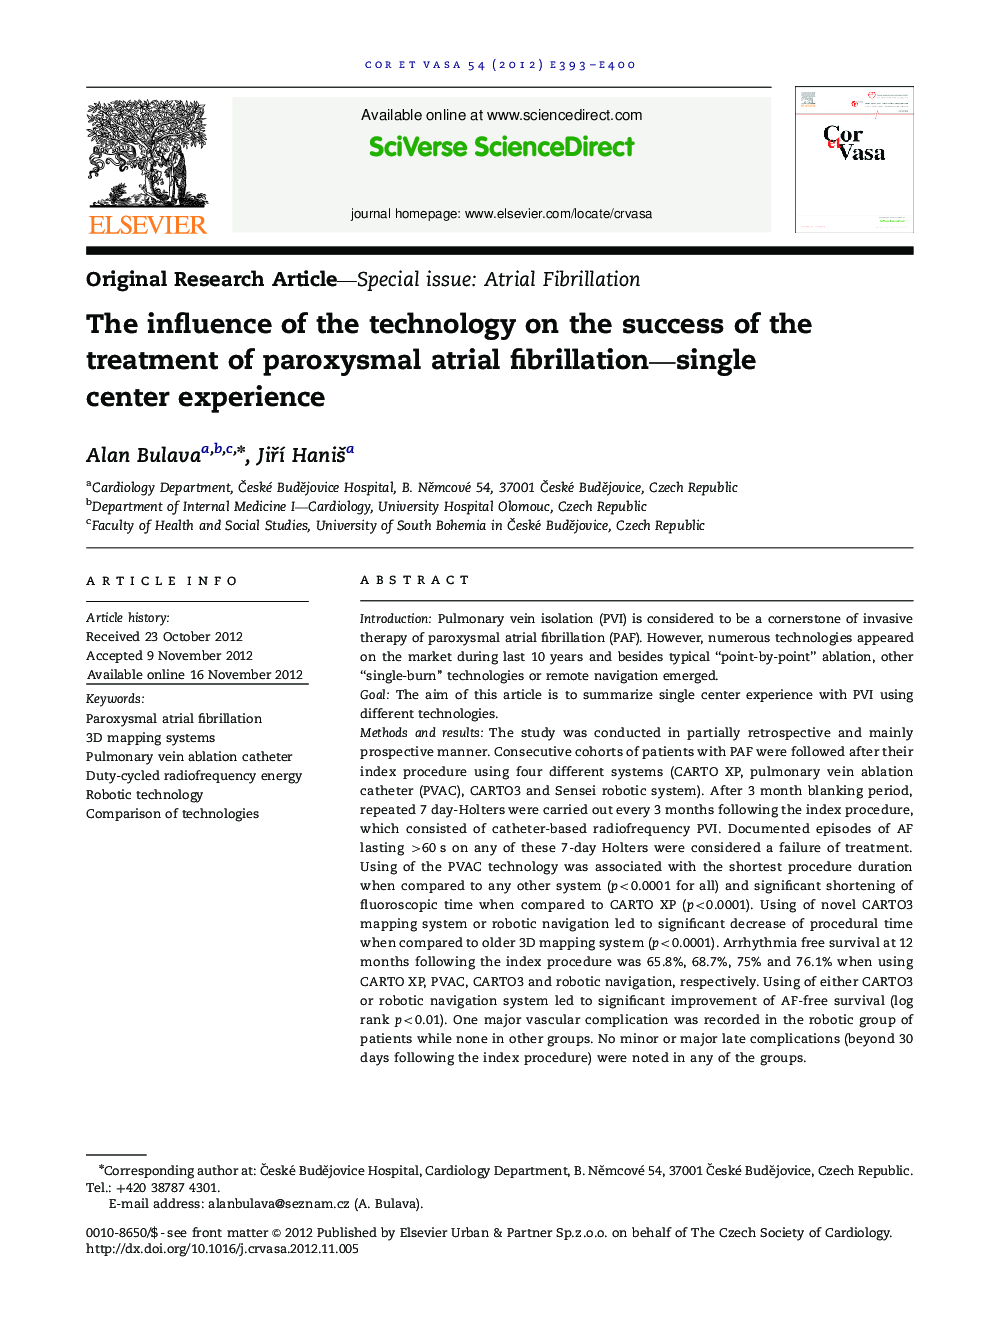 Original Research Article-Special issue: Atrial FibrillationThe influence of the technology on the success of the treatment of paroxysmal atrial fibrillation-single center experience